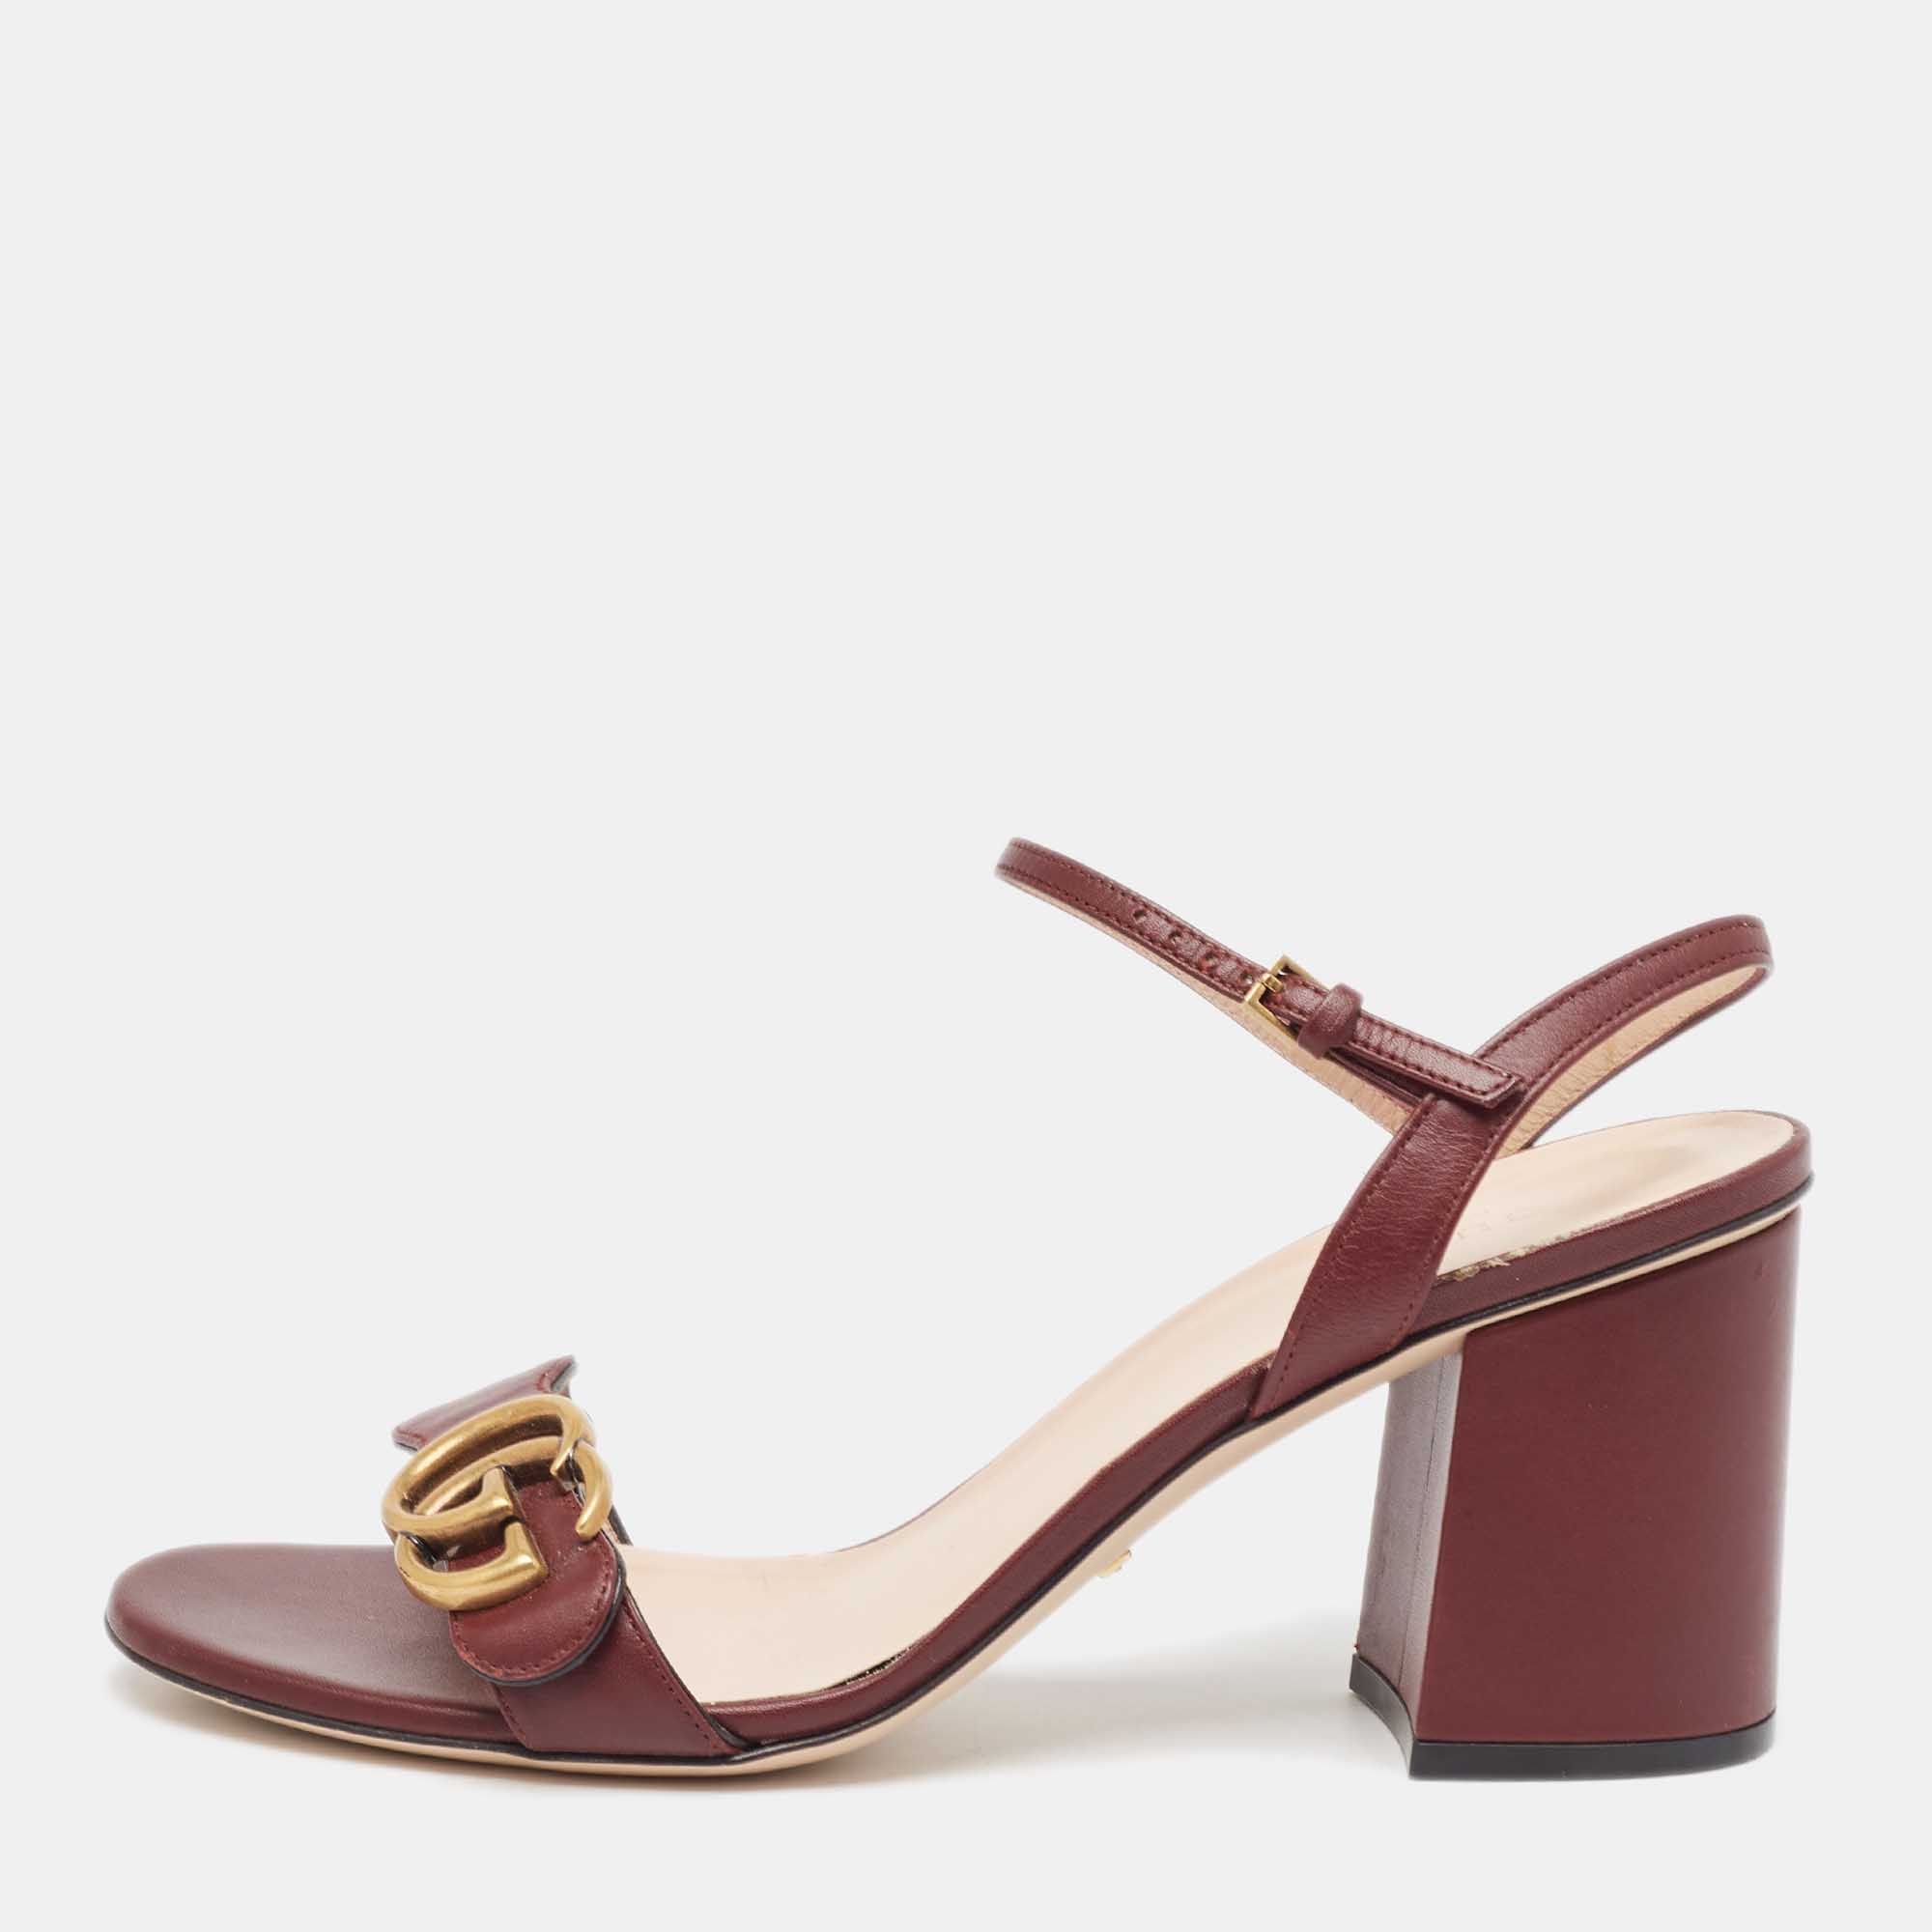 Gucci burgundy leather gg marmont ankle wrap sandals size 38.5